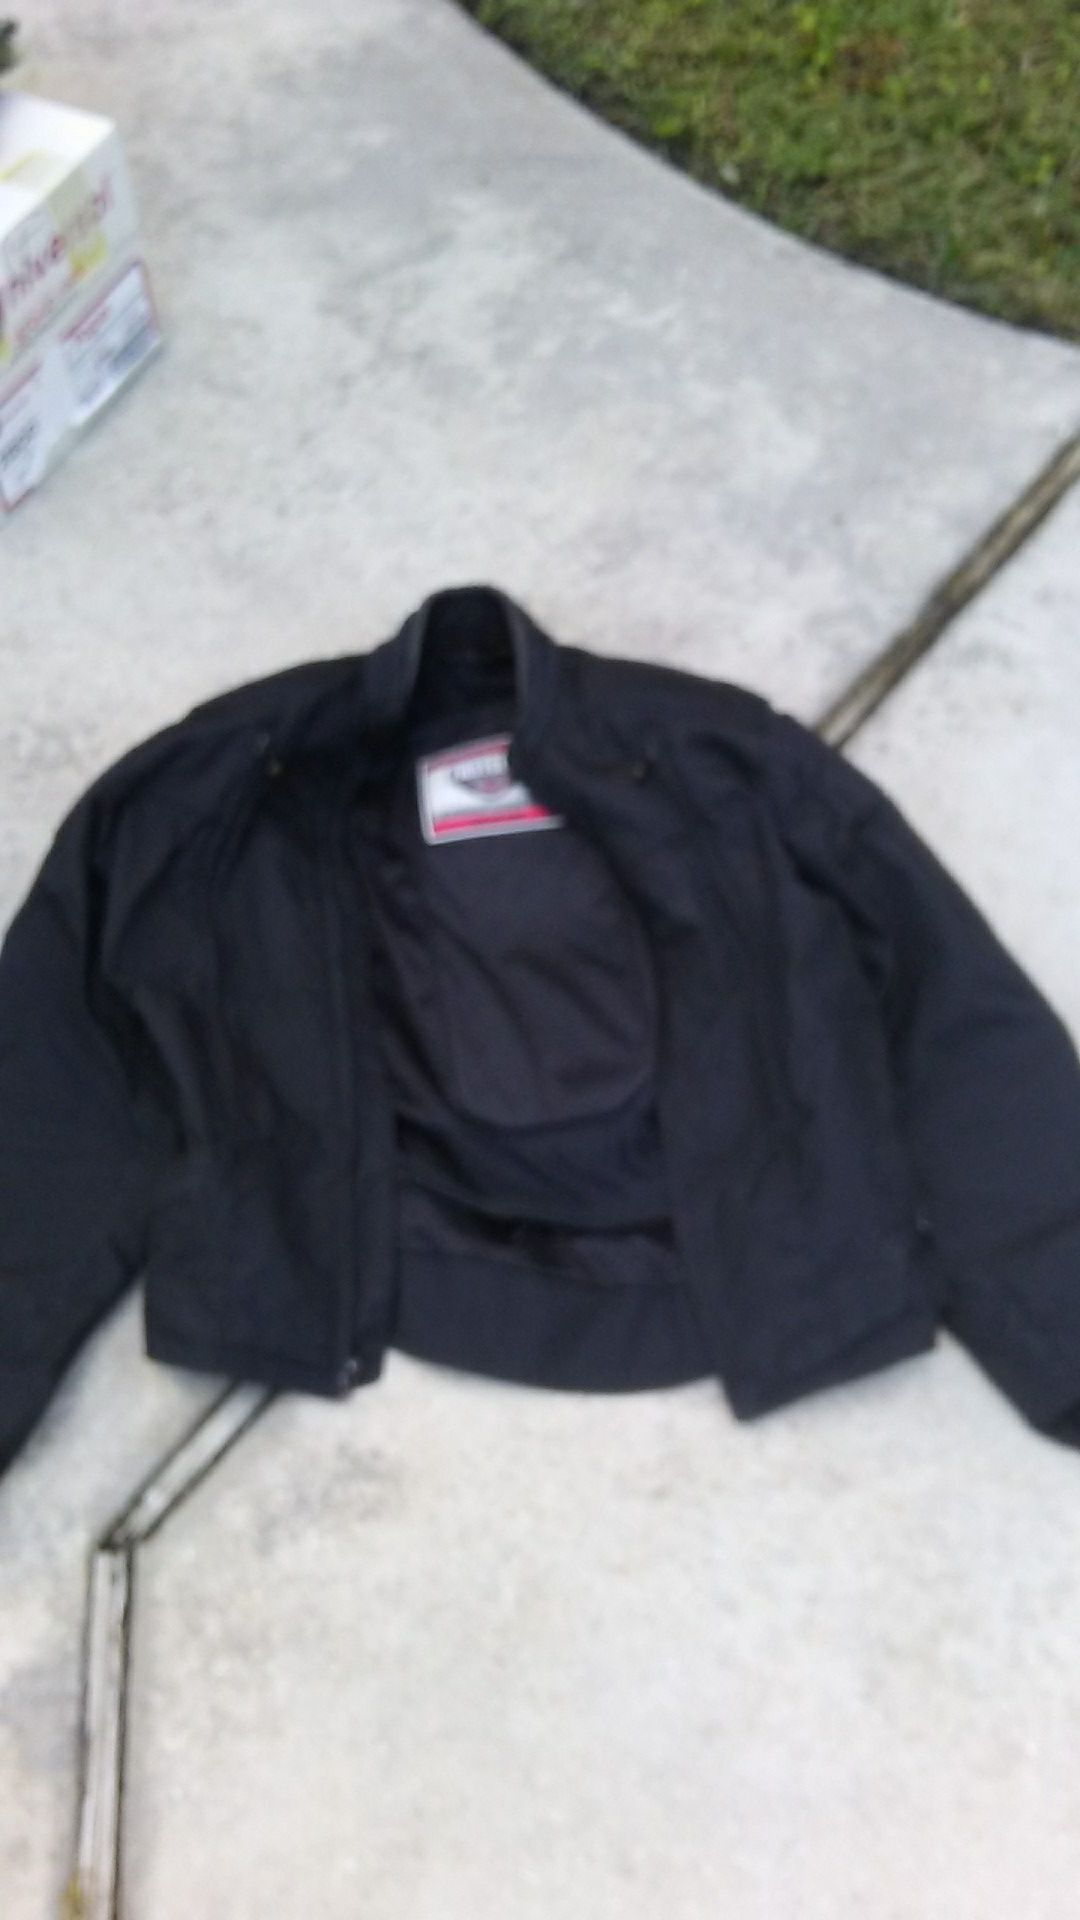 First gear motorcycle jacket